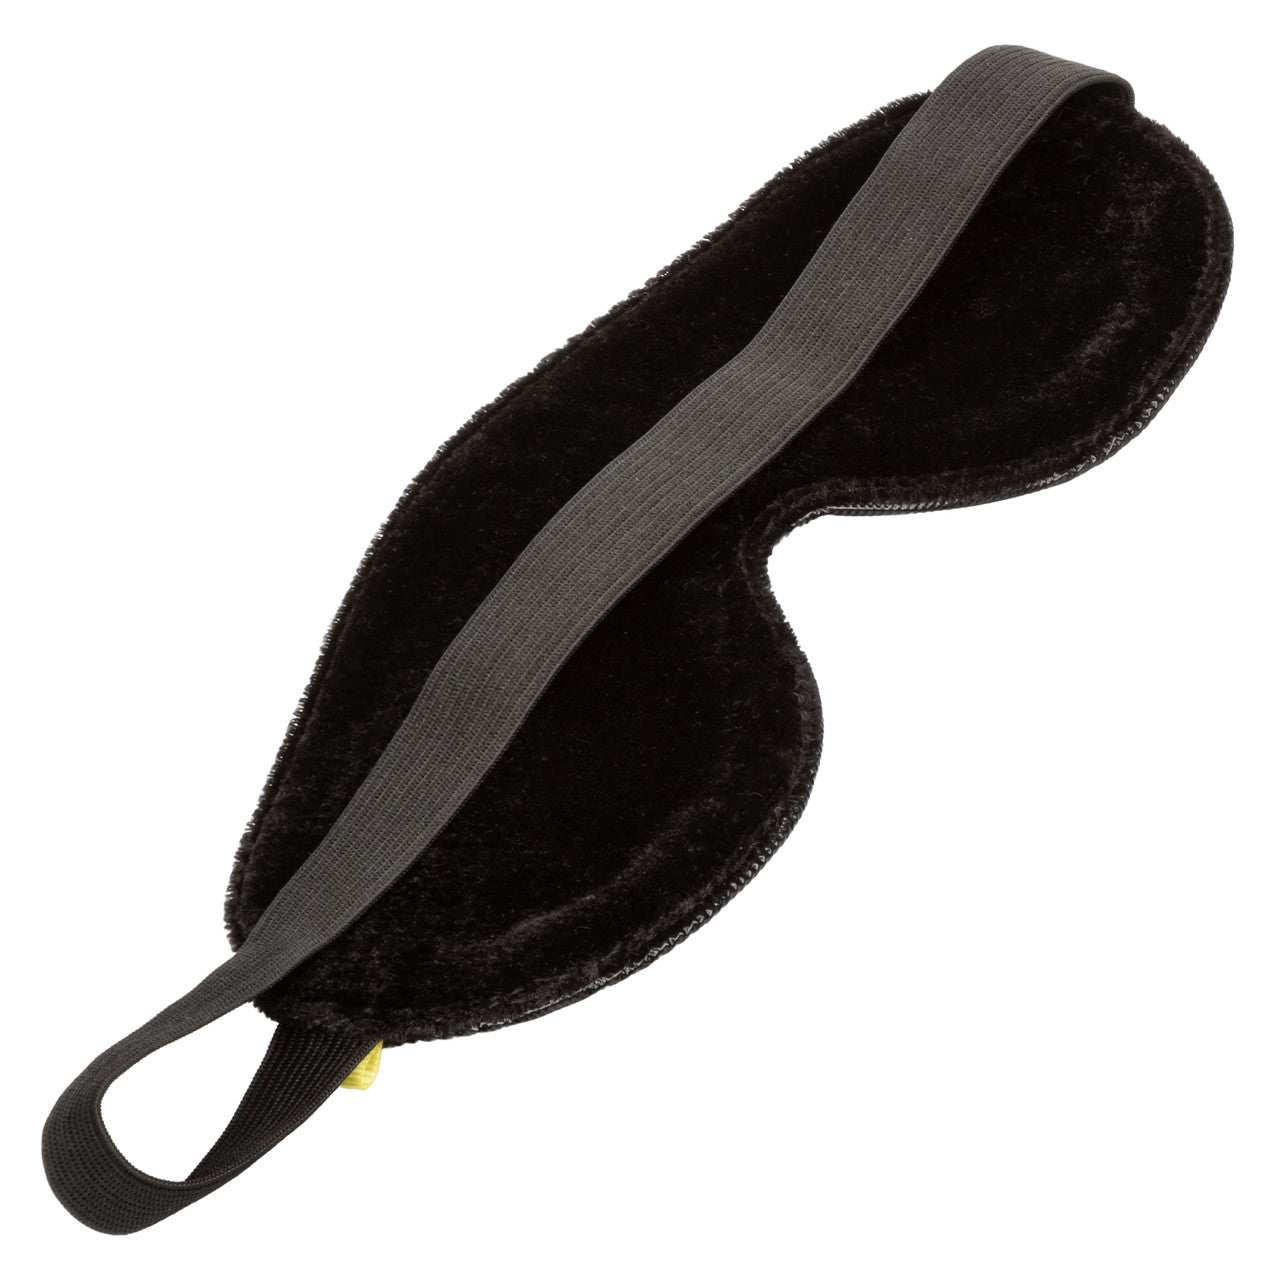 Boundless Blackout Eye Mask - Thorn & Feather Sex Toy Canada